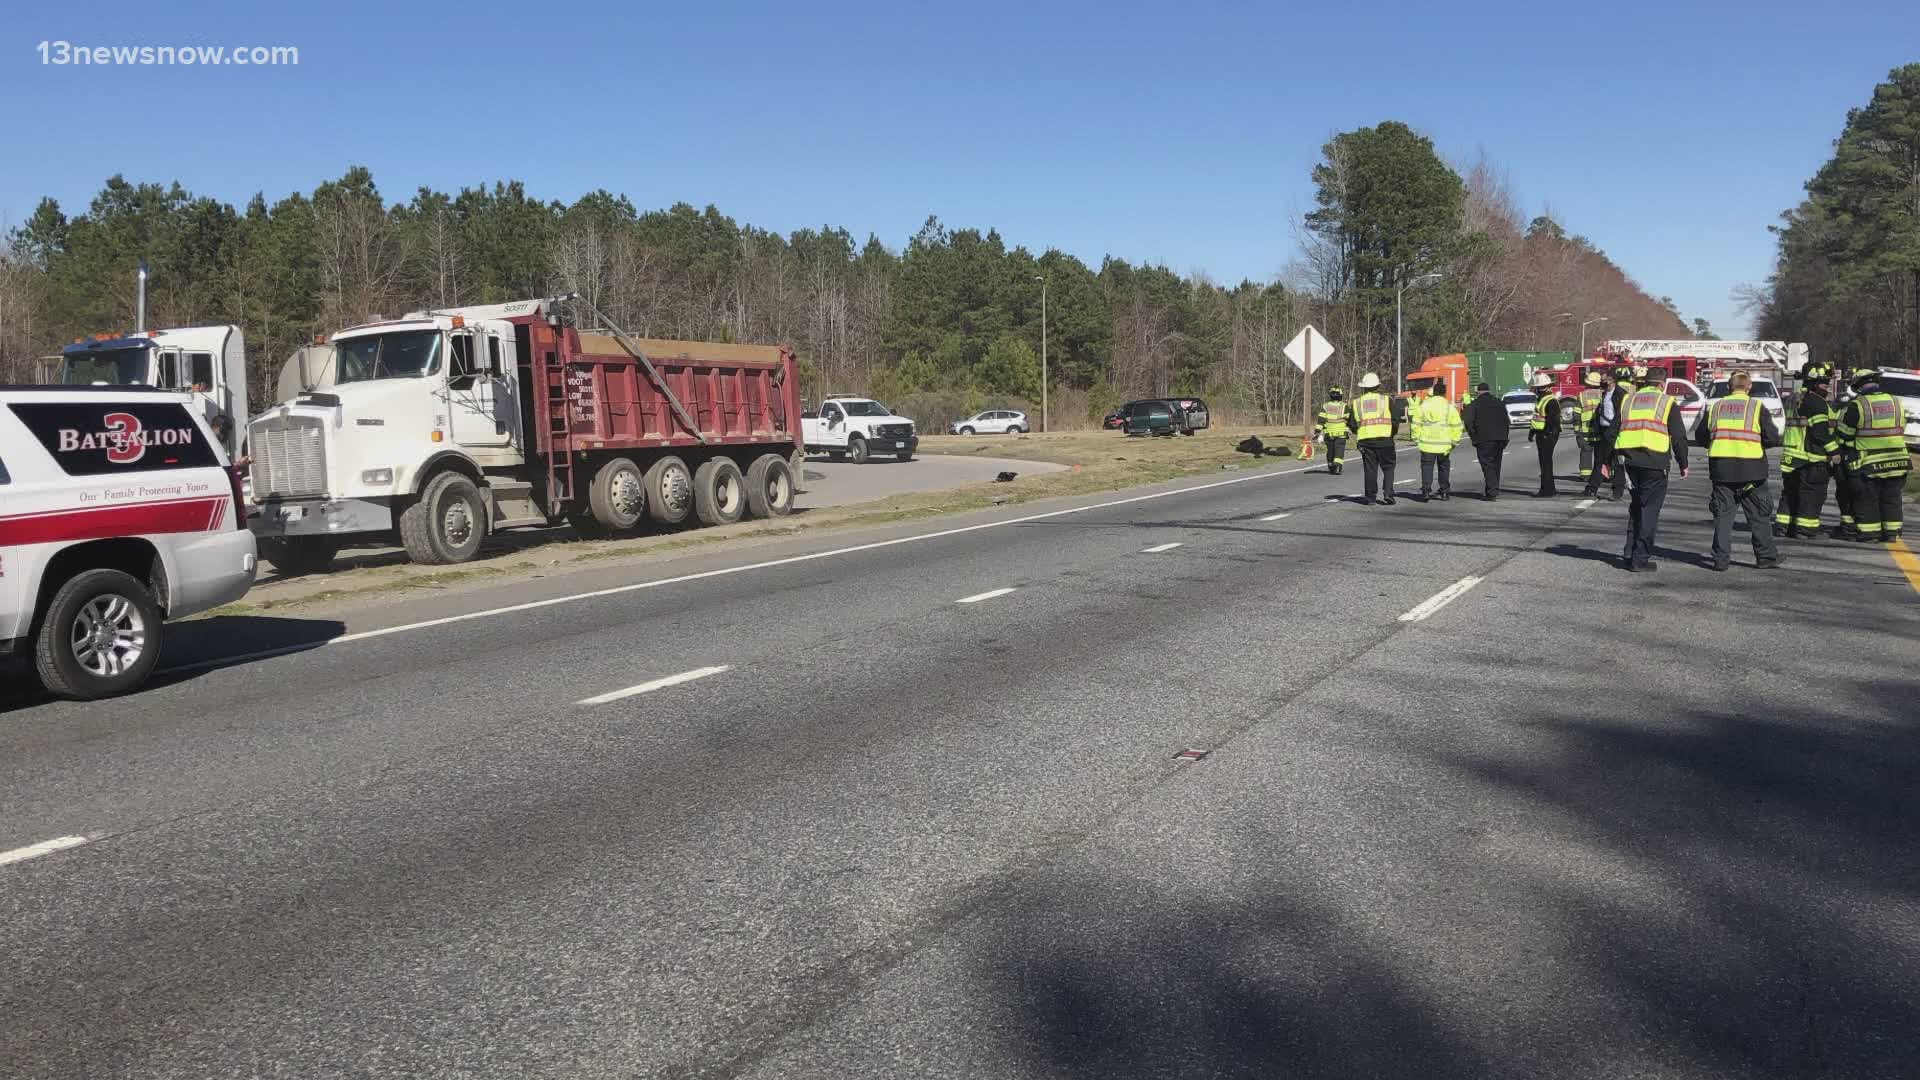 Three people were hurt after a crash involving three cars and a dump truck in Suffolk. One man was badly hurt.